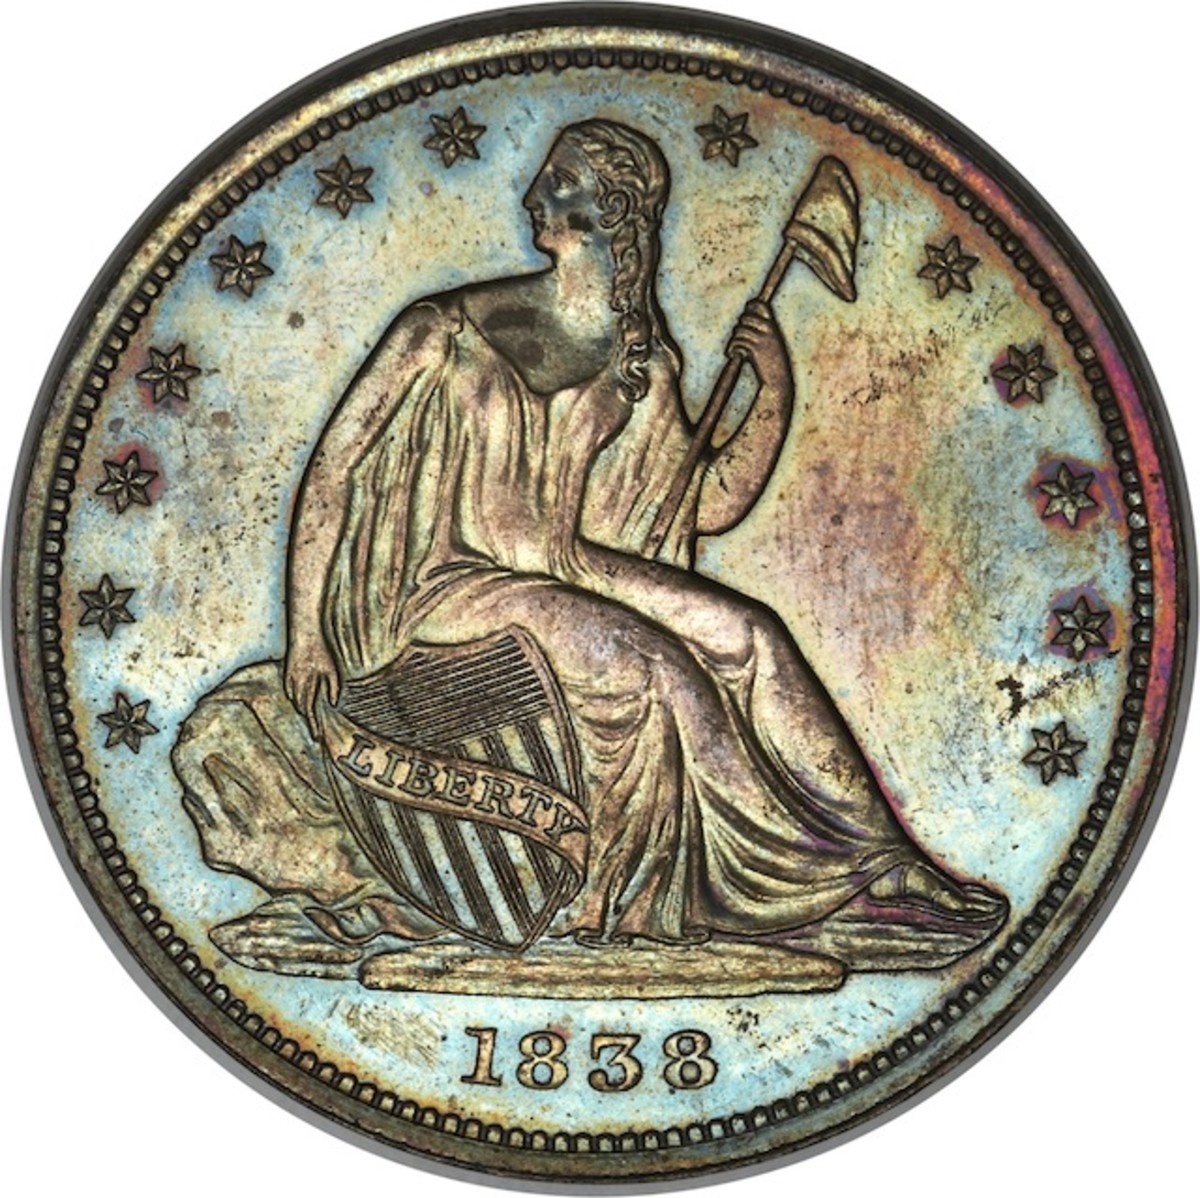 The Bass Collection 1838 plain edge Seated Liberty half dollar pattern in copper (Judd-77) will be offered without reserve by Heritage Auctions at the 2014 ANA World’s Fair of Money.  (Photo credit: Images from Heritage Auctions with permission from the Harry W. Bass Jr. Foundation.)